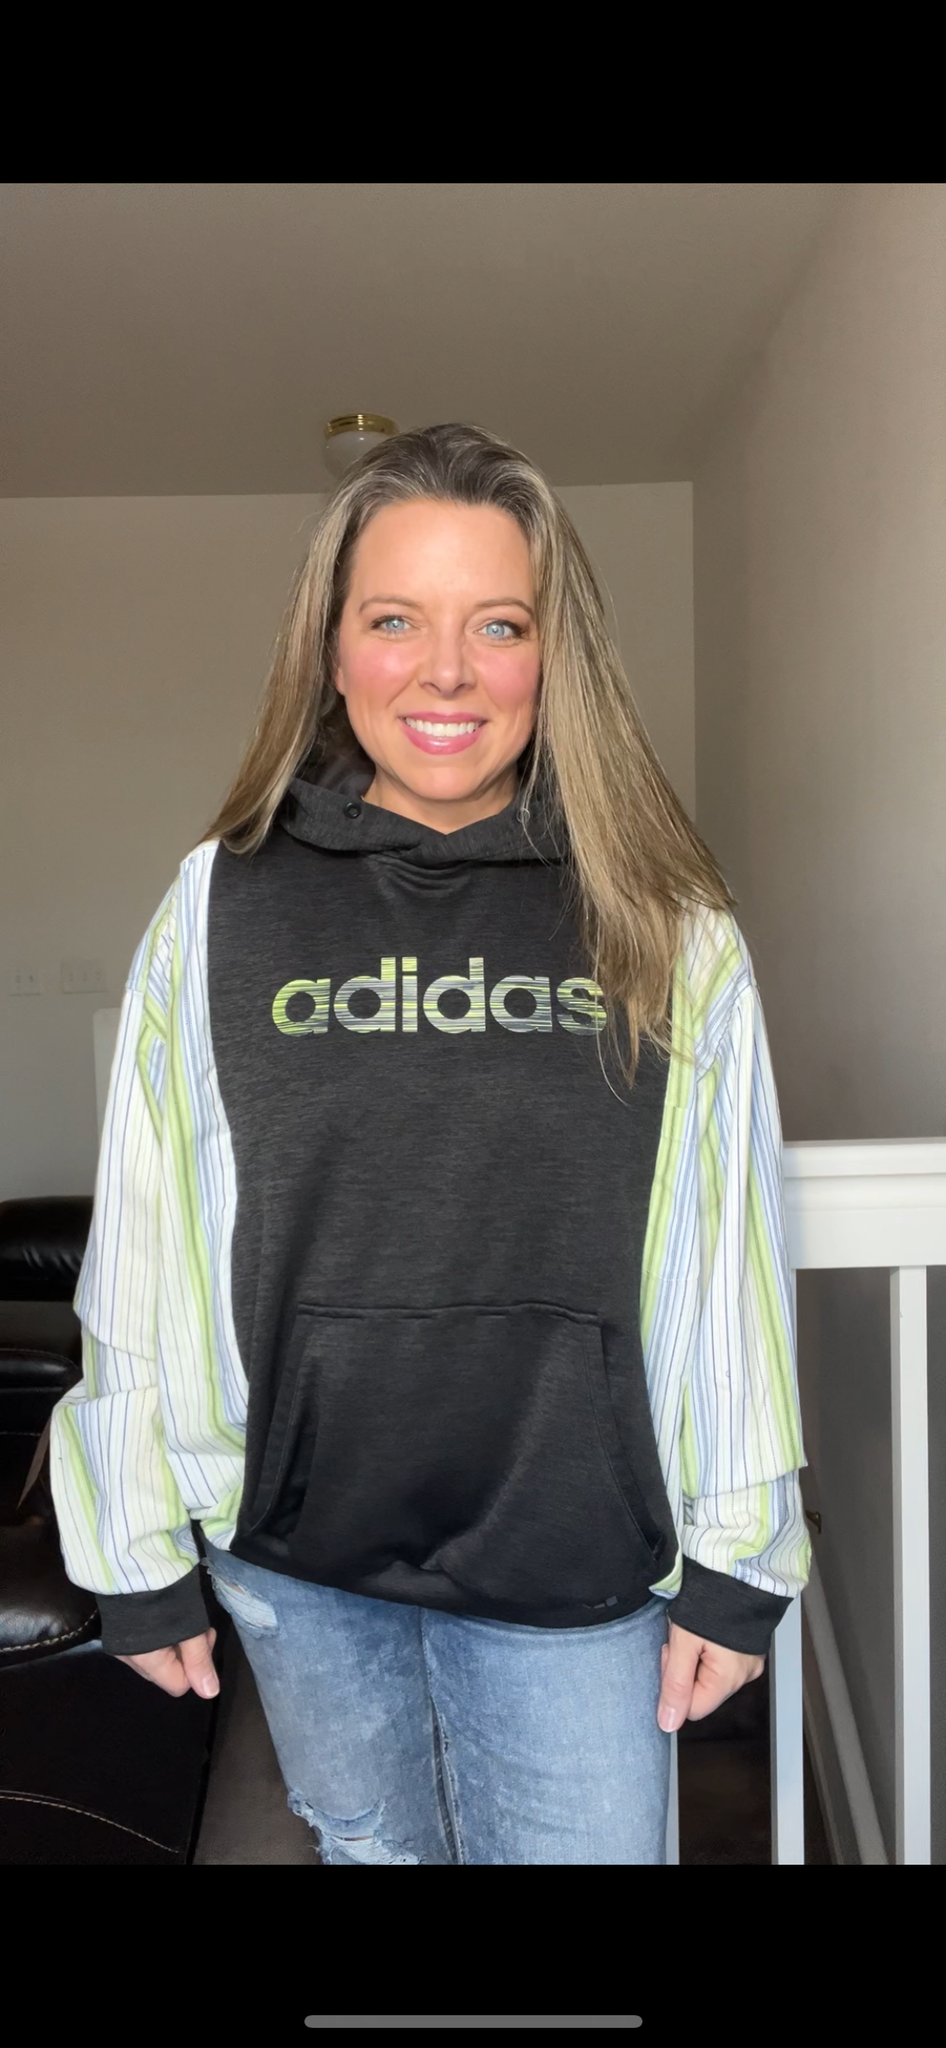 Upcycled Green Black Adidas – women’s L/XL – soft thick sweatshirt with thin cotton sleeves – bottom band and neck slightly tighter ￼